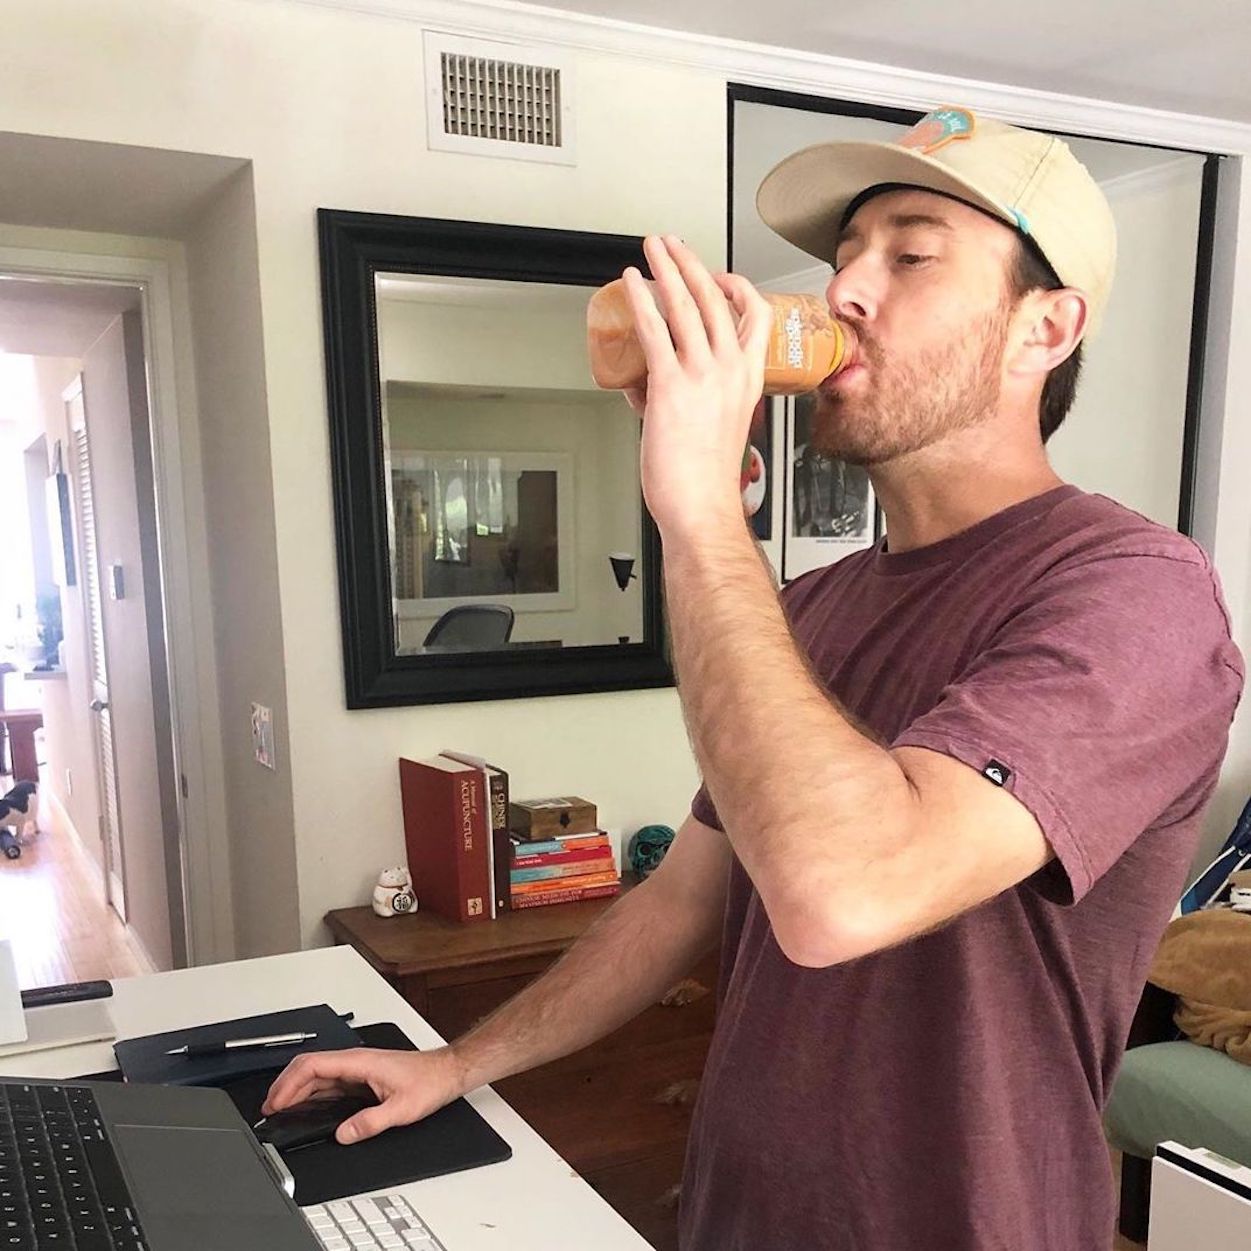 The social media personality Live to Sustain drinks a Splendid Spoon Carrot Ginger Chia smoothie in a living room. He is working on a laptop at a standing desk, and is looking at the laptop while he takes a sip. His had is on a mouse connected to the laptop.